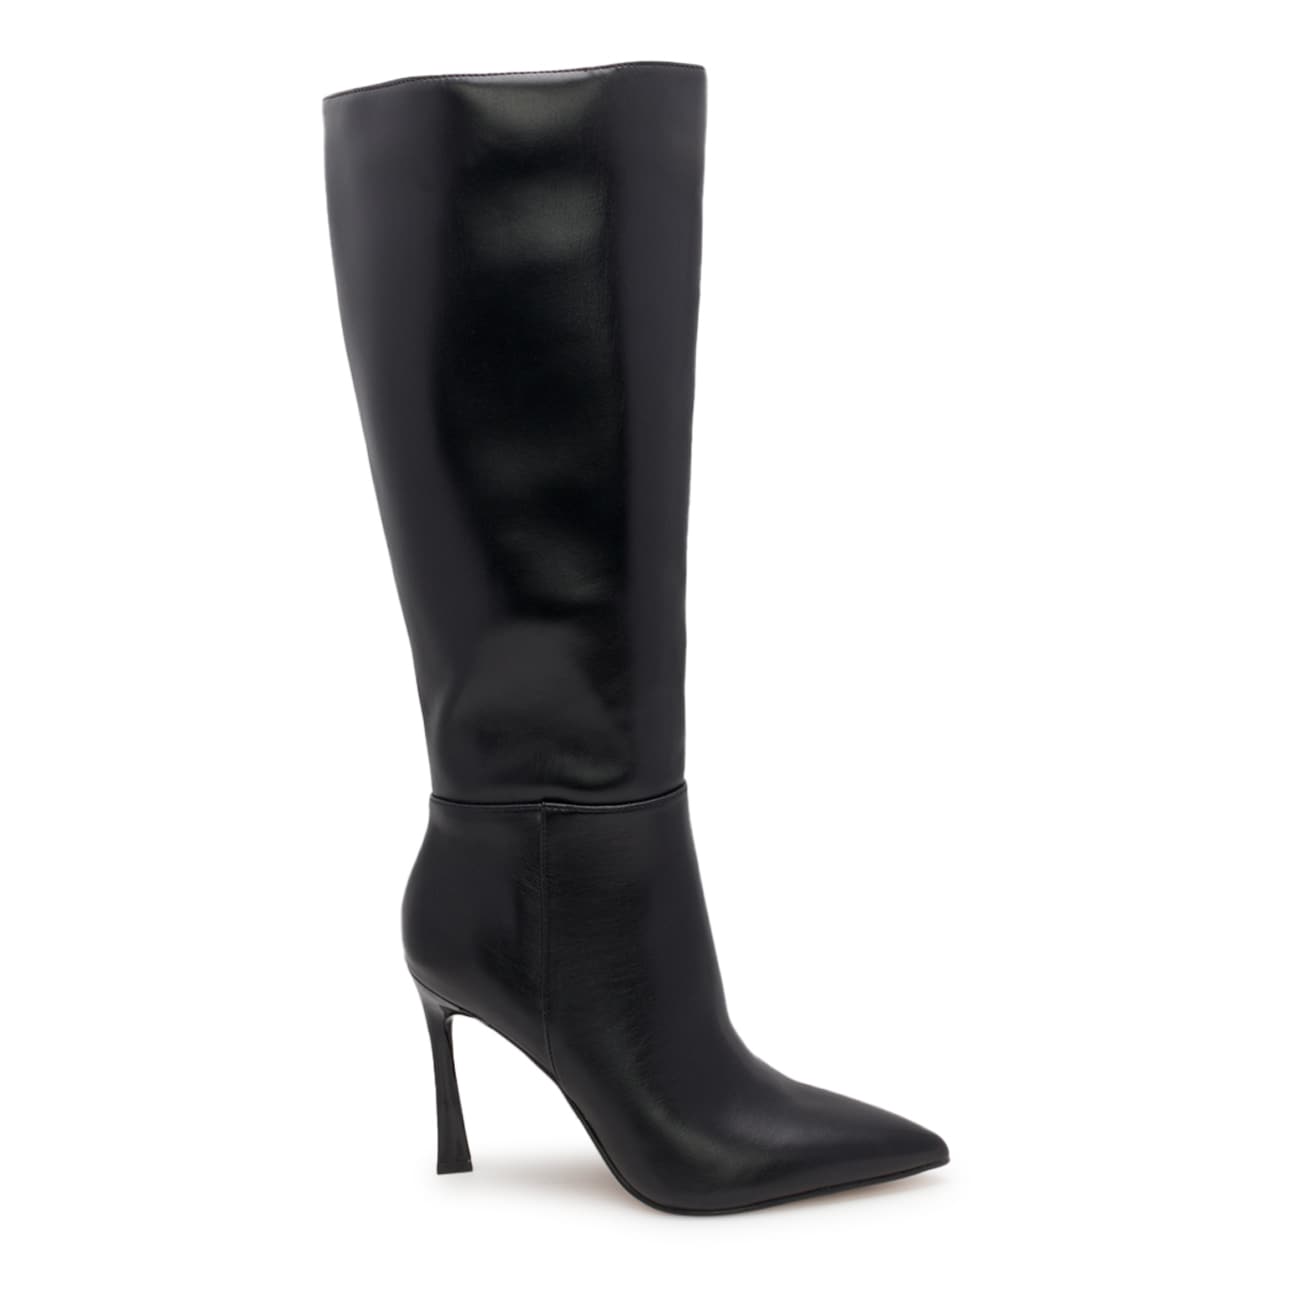 Kelly & Katie Sion Wide Width Wide Calf Knee High Boot